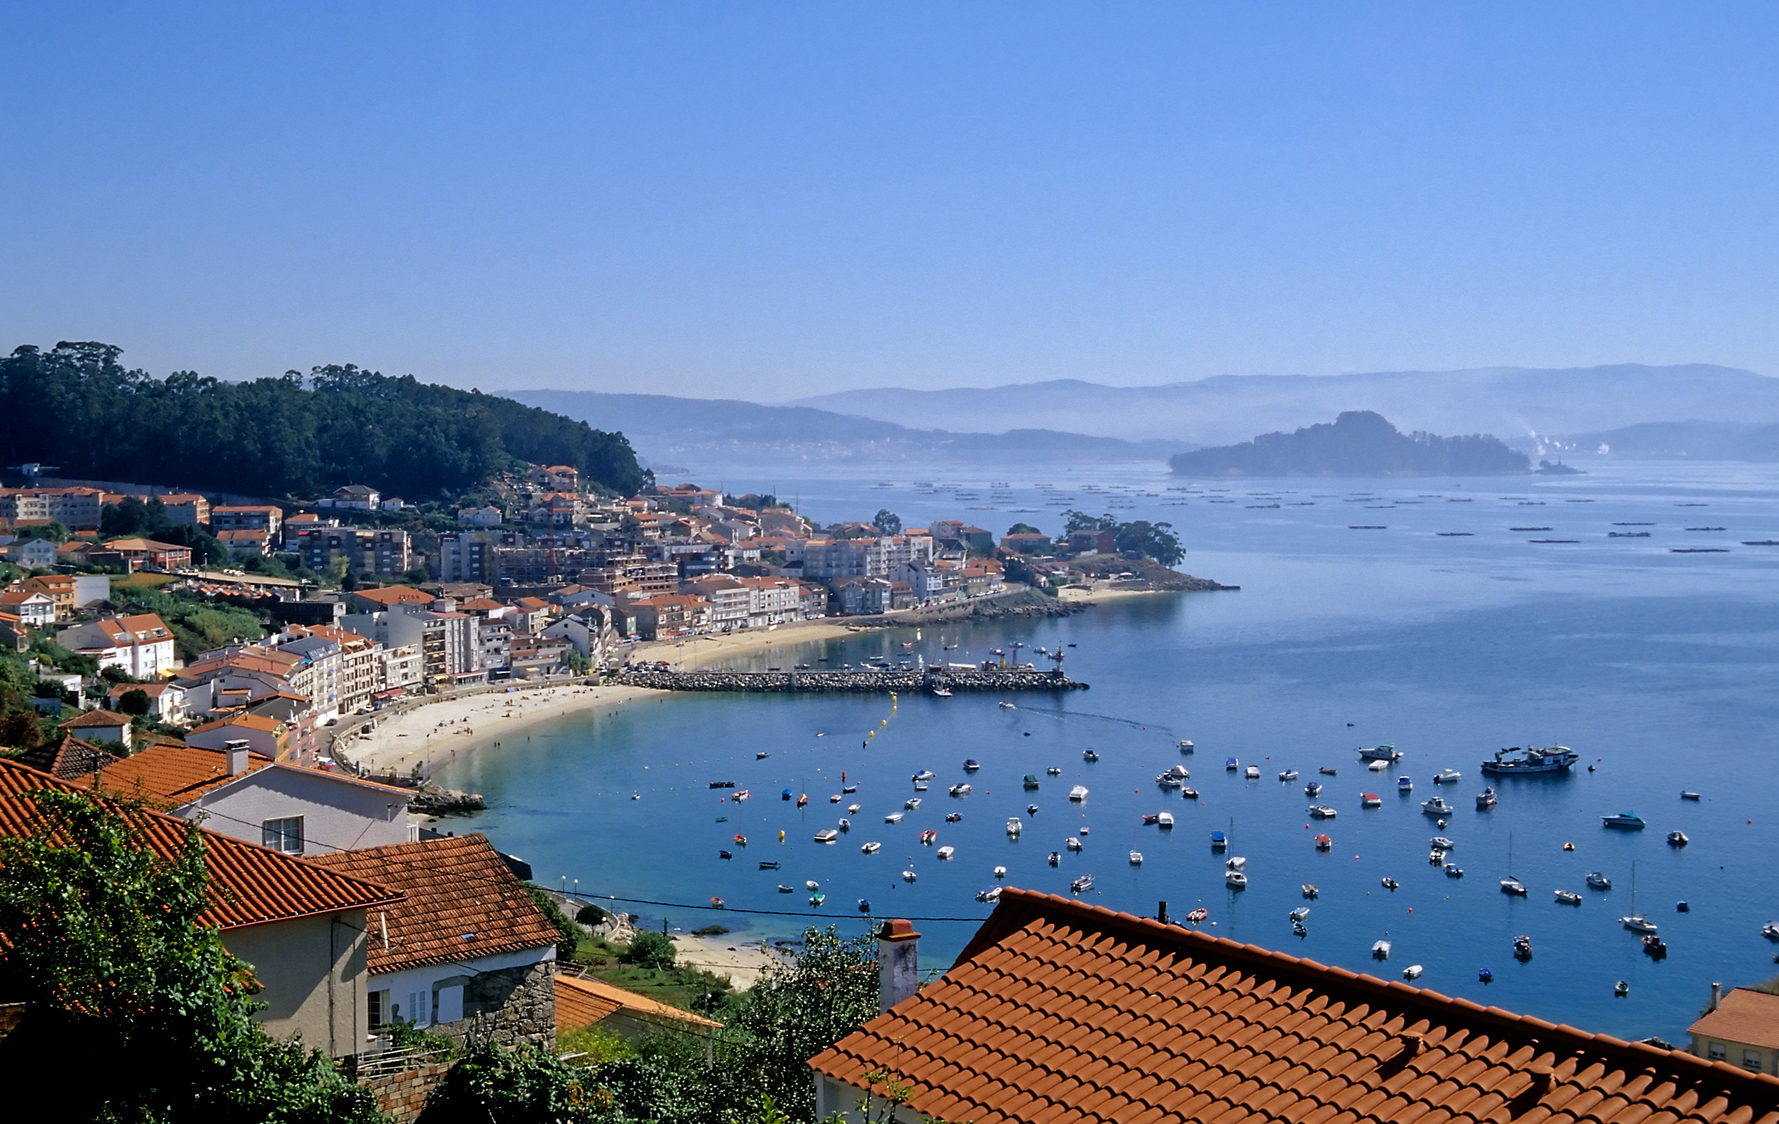 HD Wallpaper Source Galicia You Can Photo Gallery